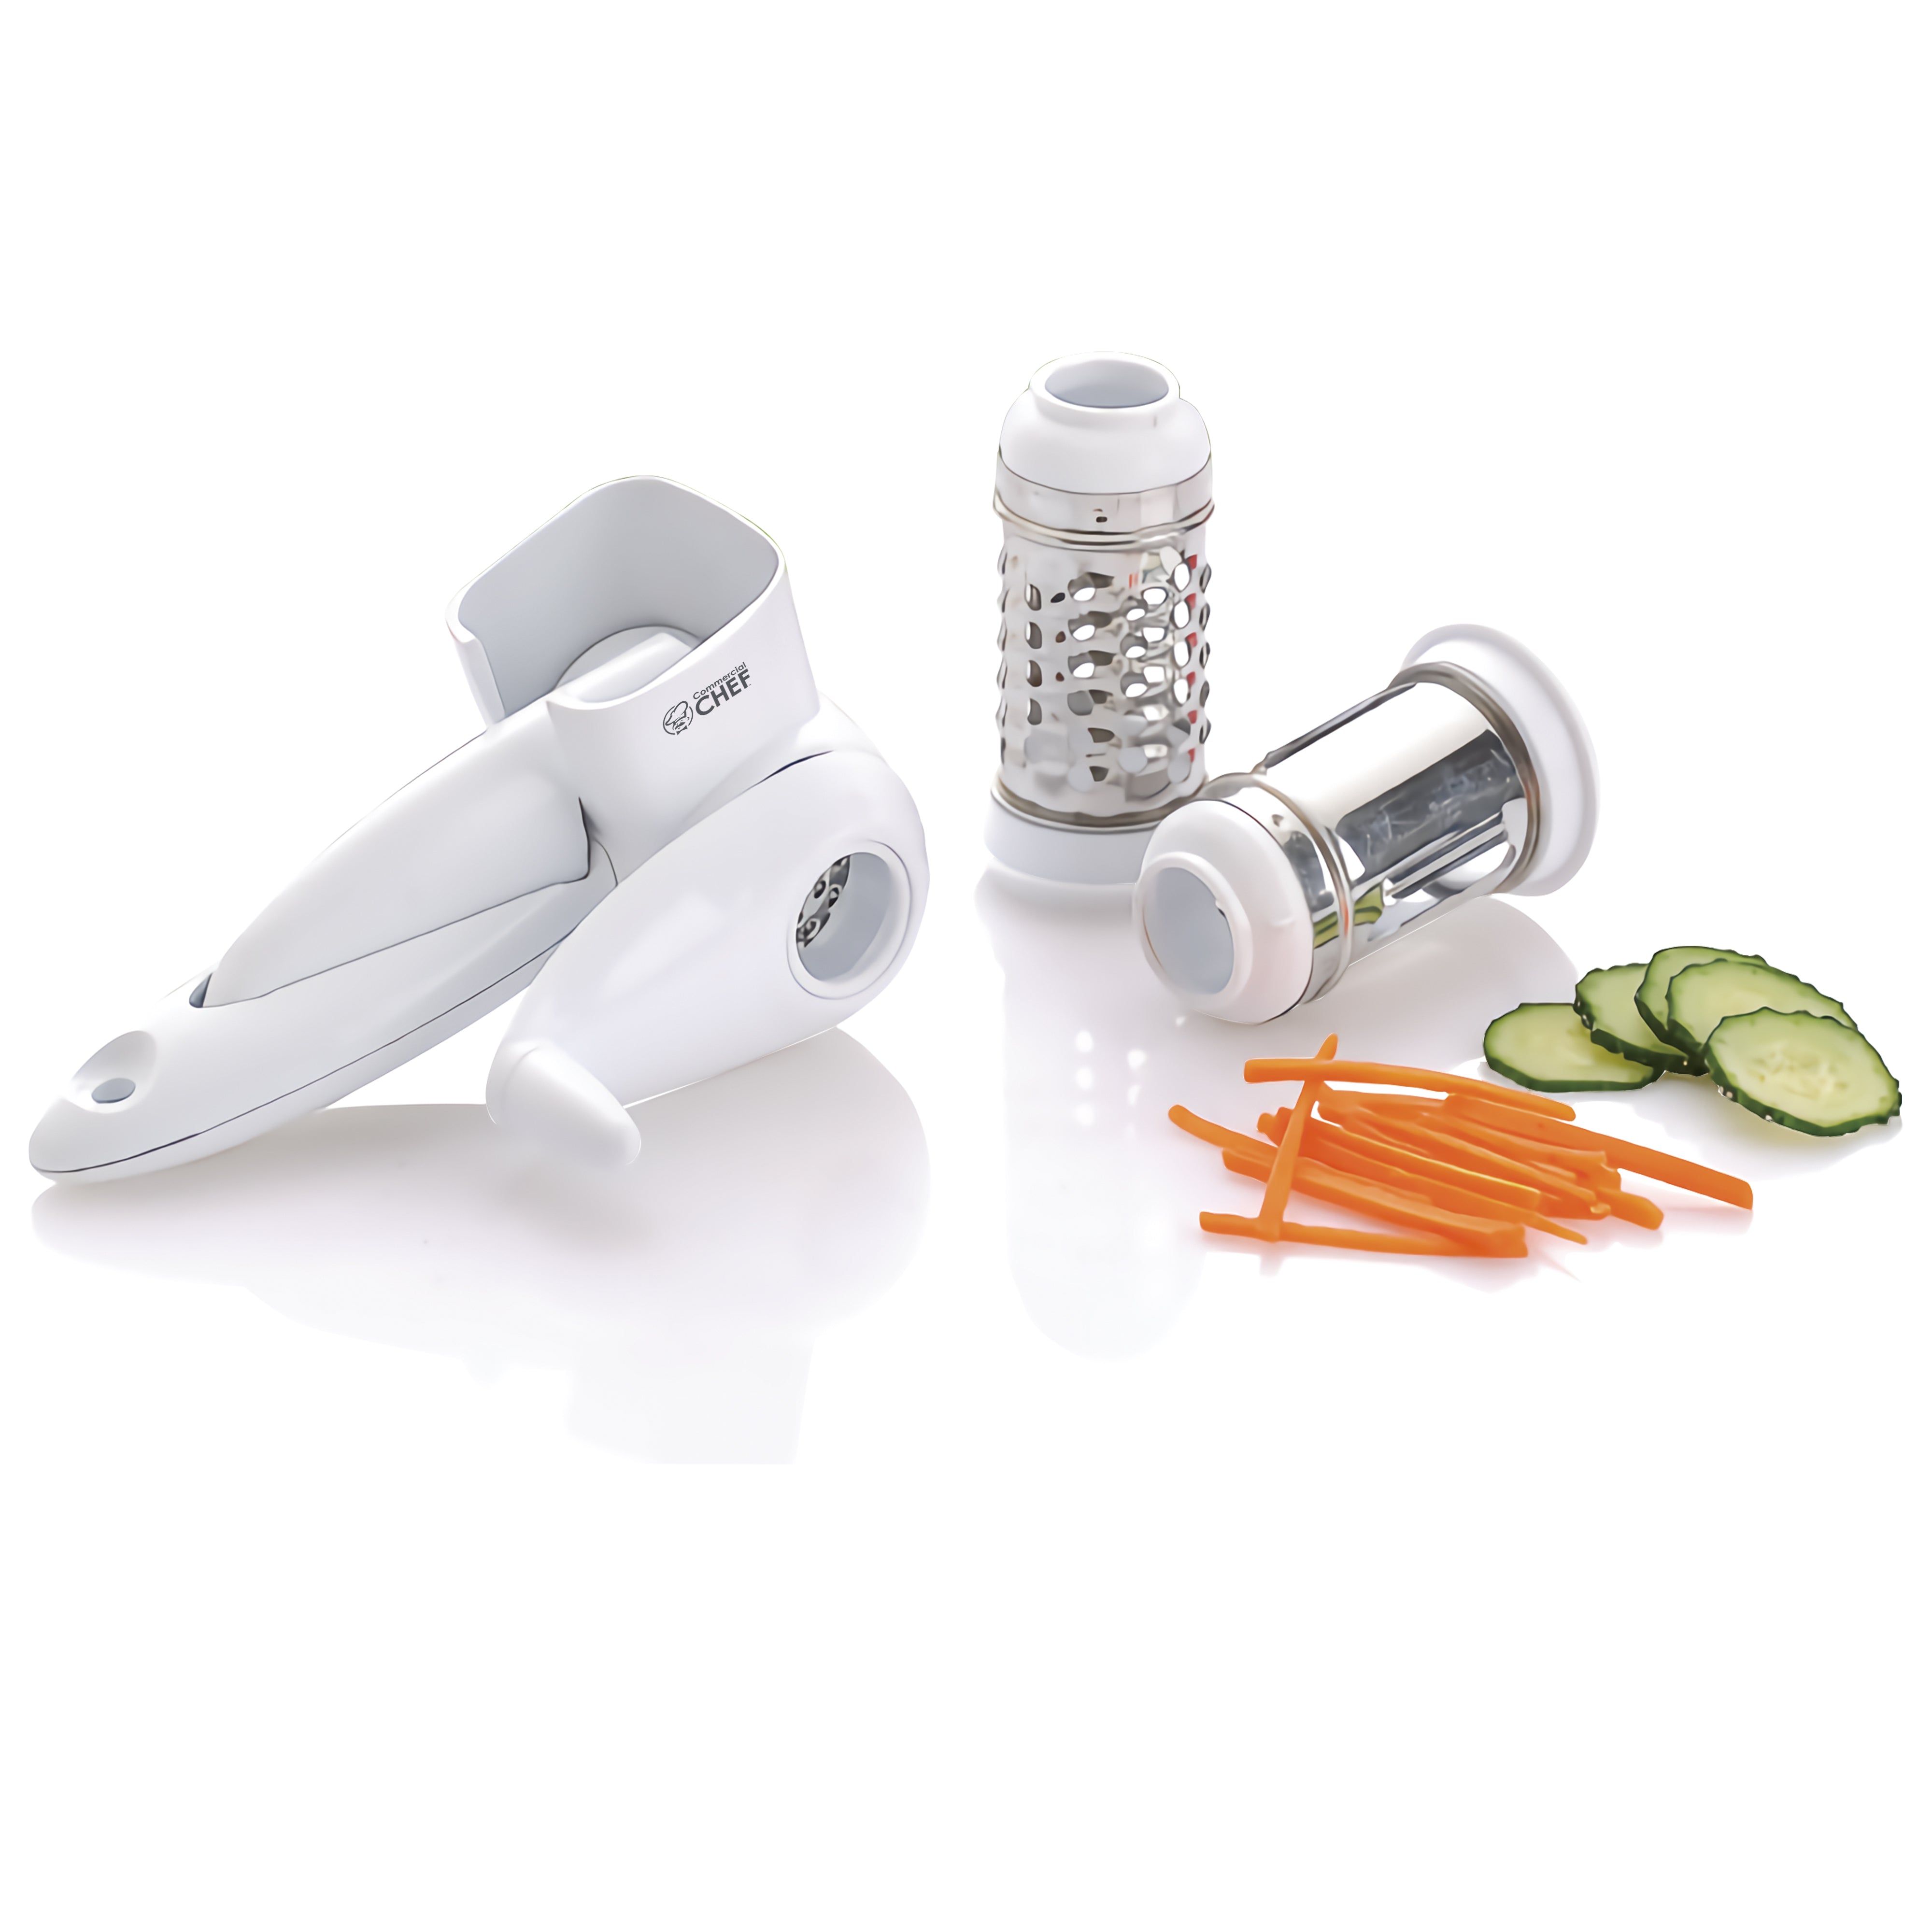 Commercial Chef Mini Hand Held Grater With Interchangeable Blades - 2 In 1 Manual Rotary Cheese Grater Stainless Steel Cheese, Nuts, Chocolate Cutter Blades